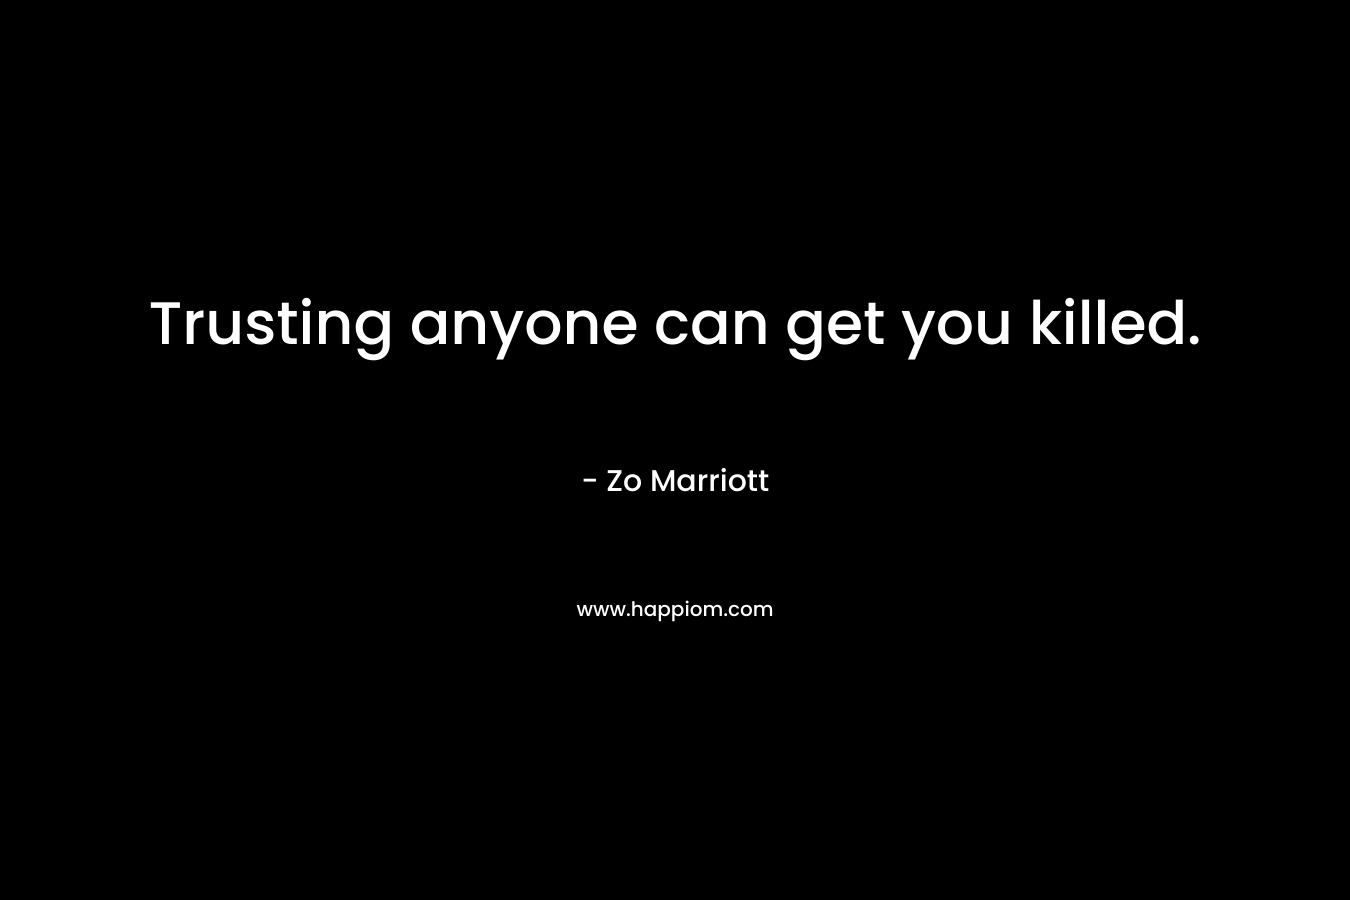 Trusting anyone can get you killed. – Zo Marriott